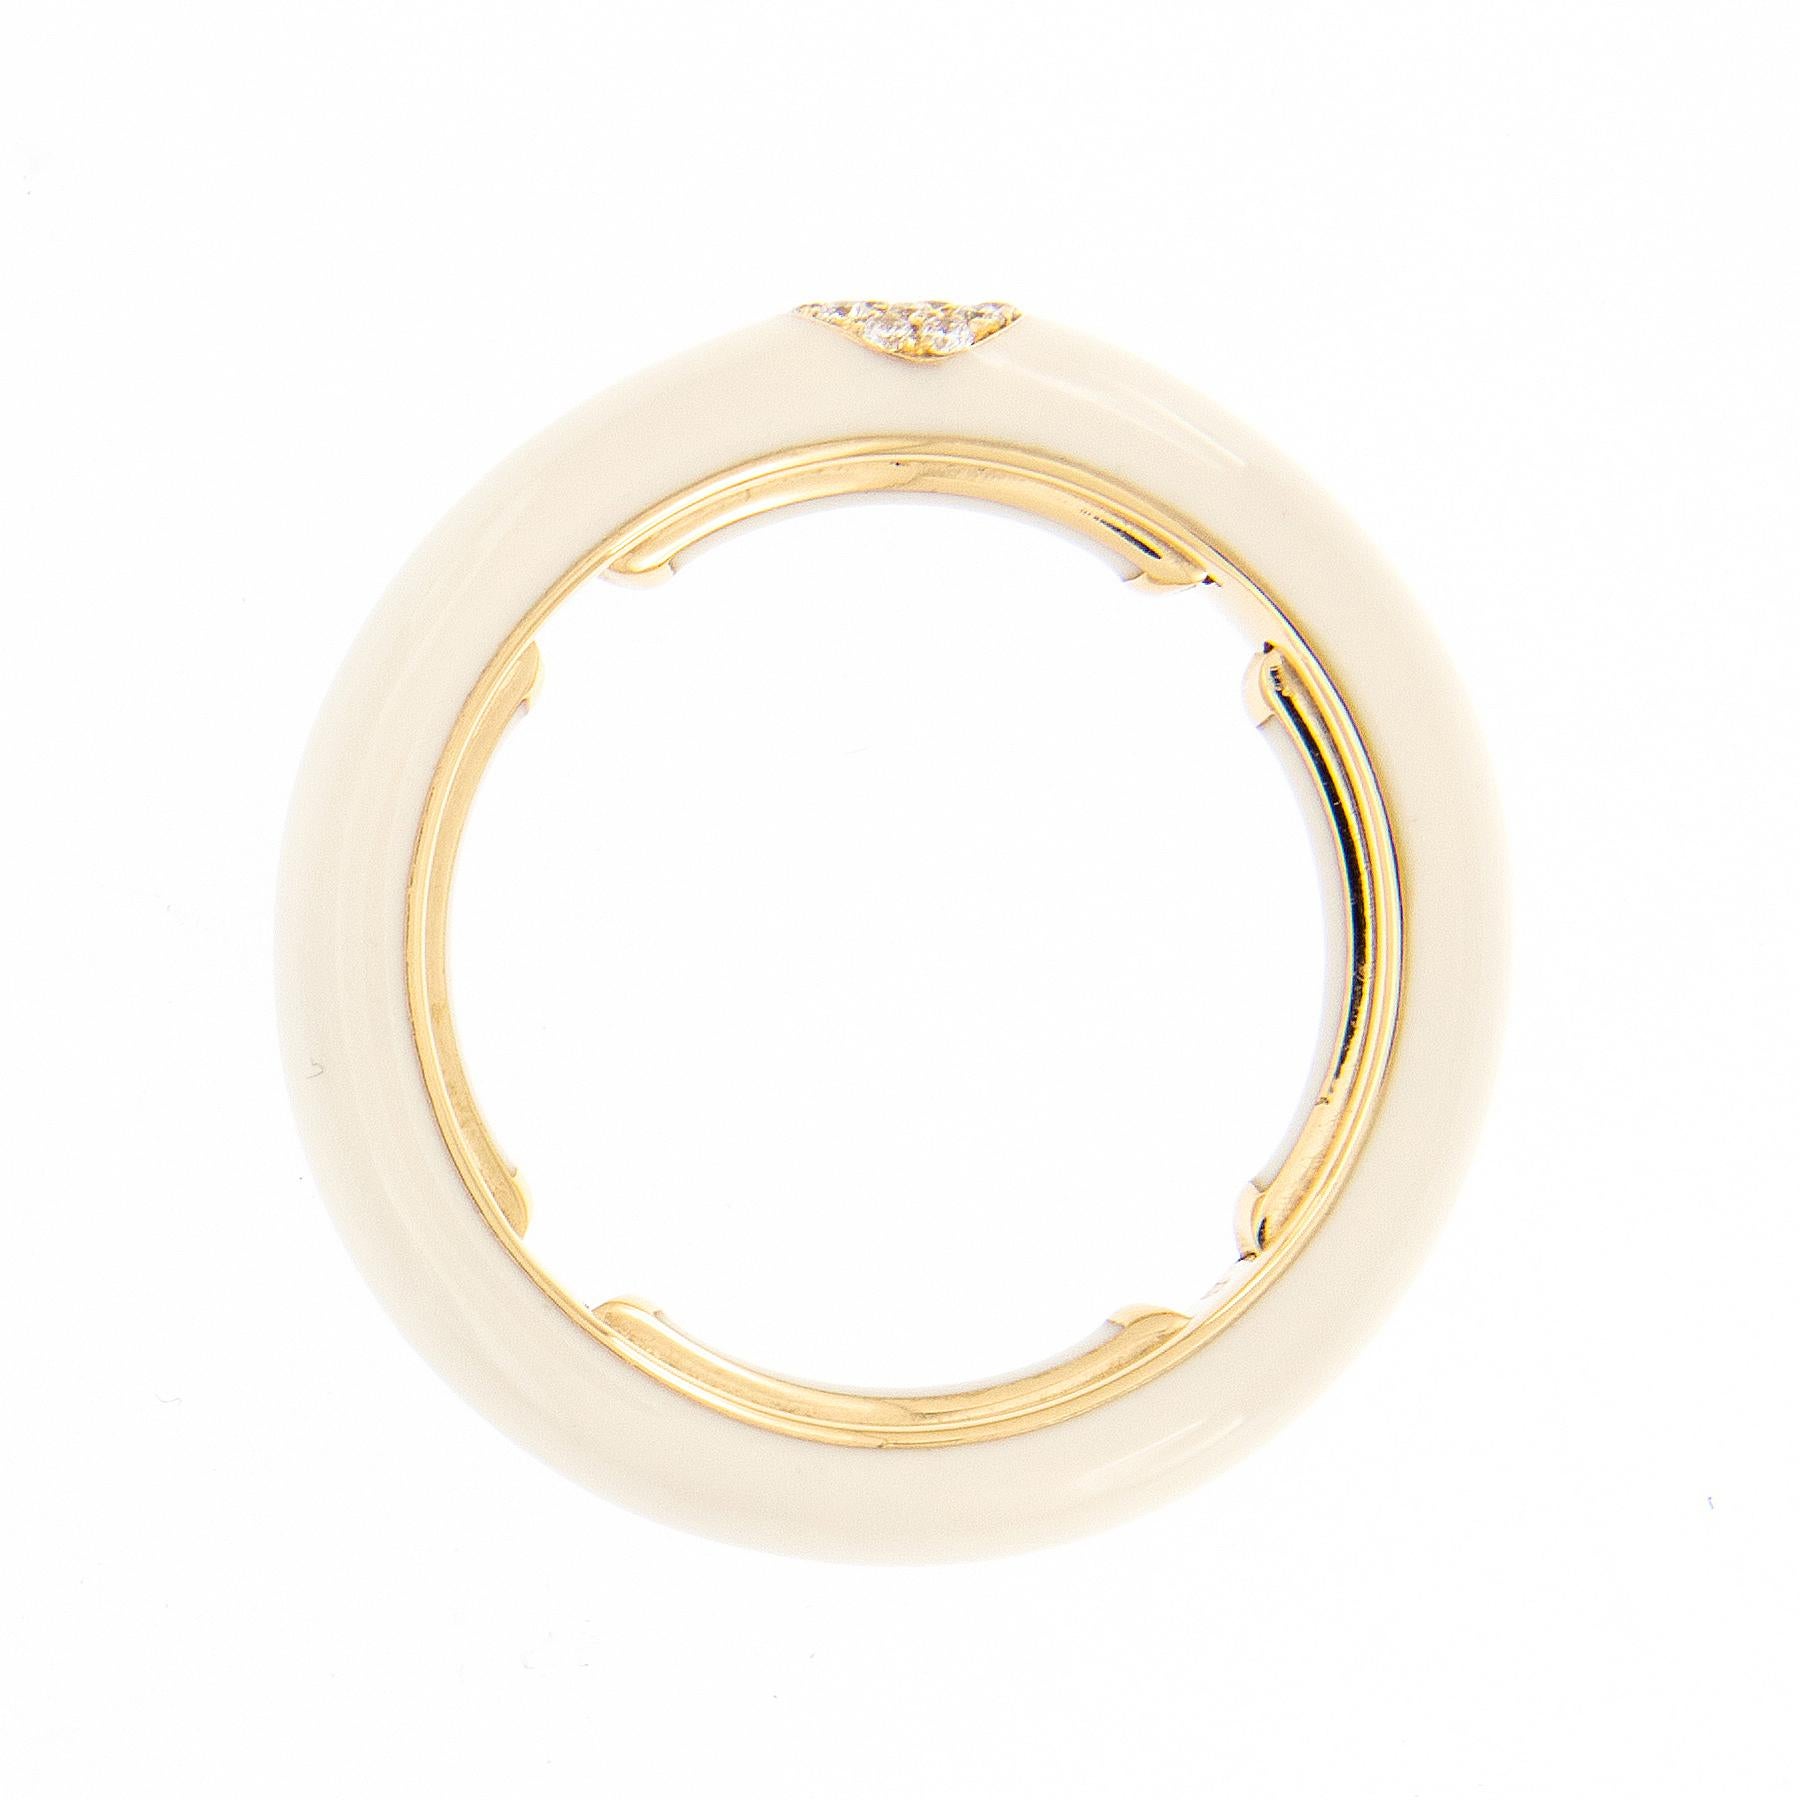 Bold, bright and beautiful! This contemporary enamel ring is hand-crafted in Italy for Campanelli & Pear. Ring is 18k yellow gold featuring a smooth enamel finish in ivory and accented with 14 pave set diamonds. The ring features a unique adjustable